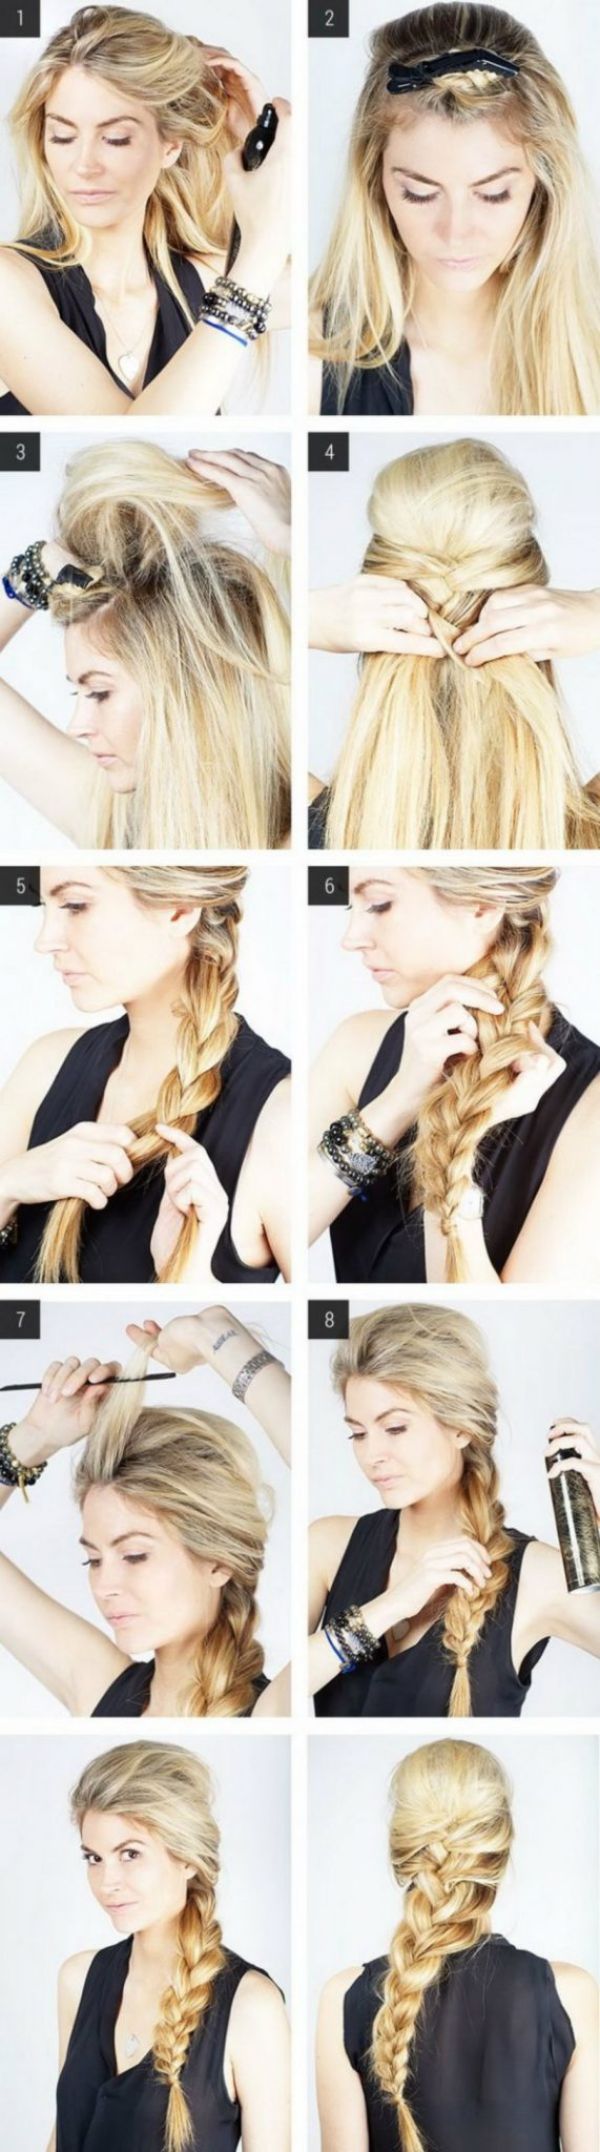 Lazy Hairstyles Ideas For A Go-To Look - K4 Fashion